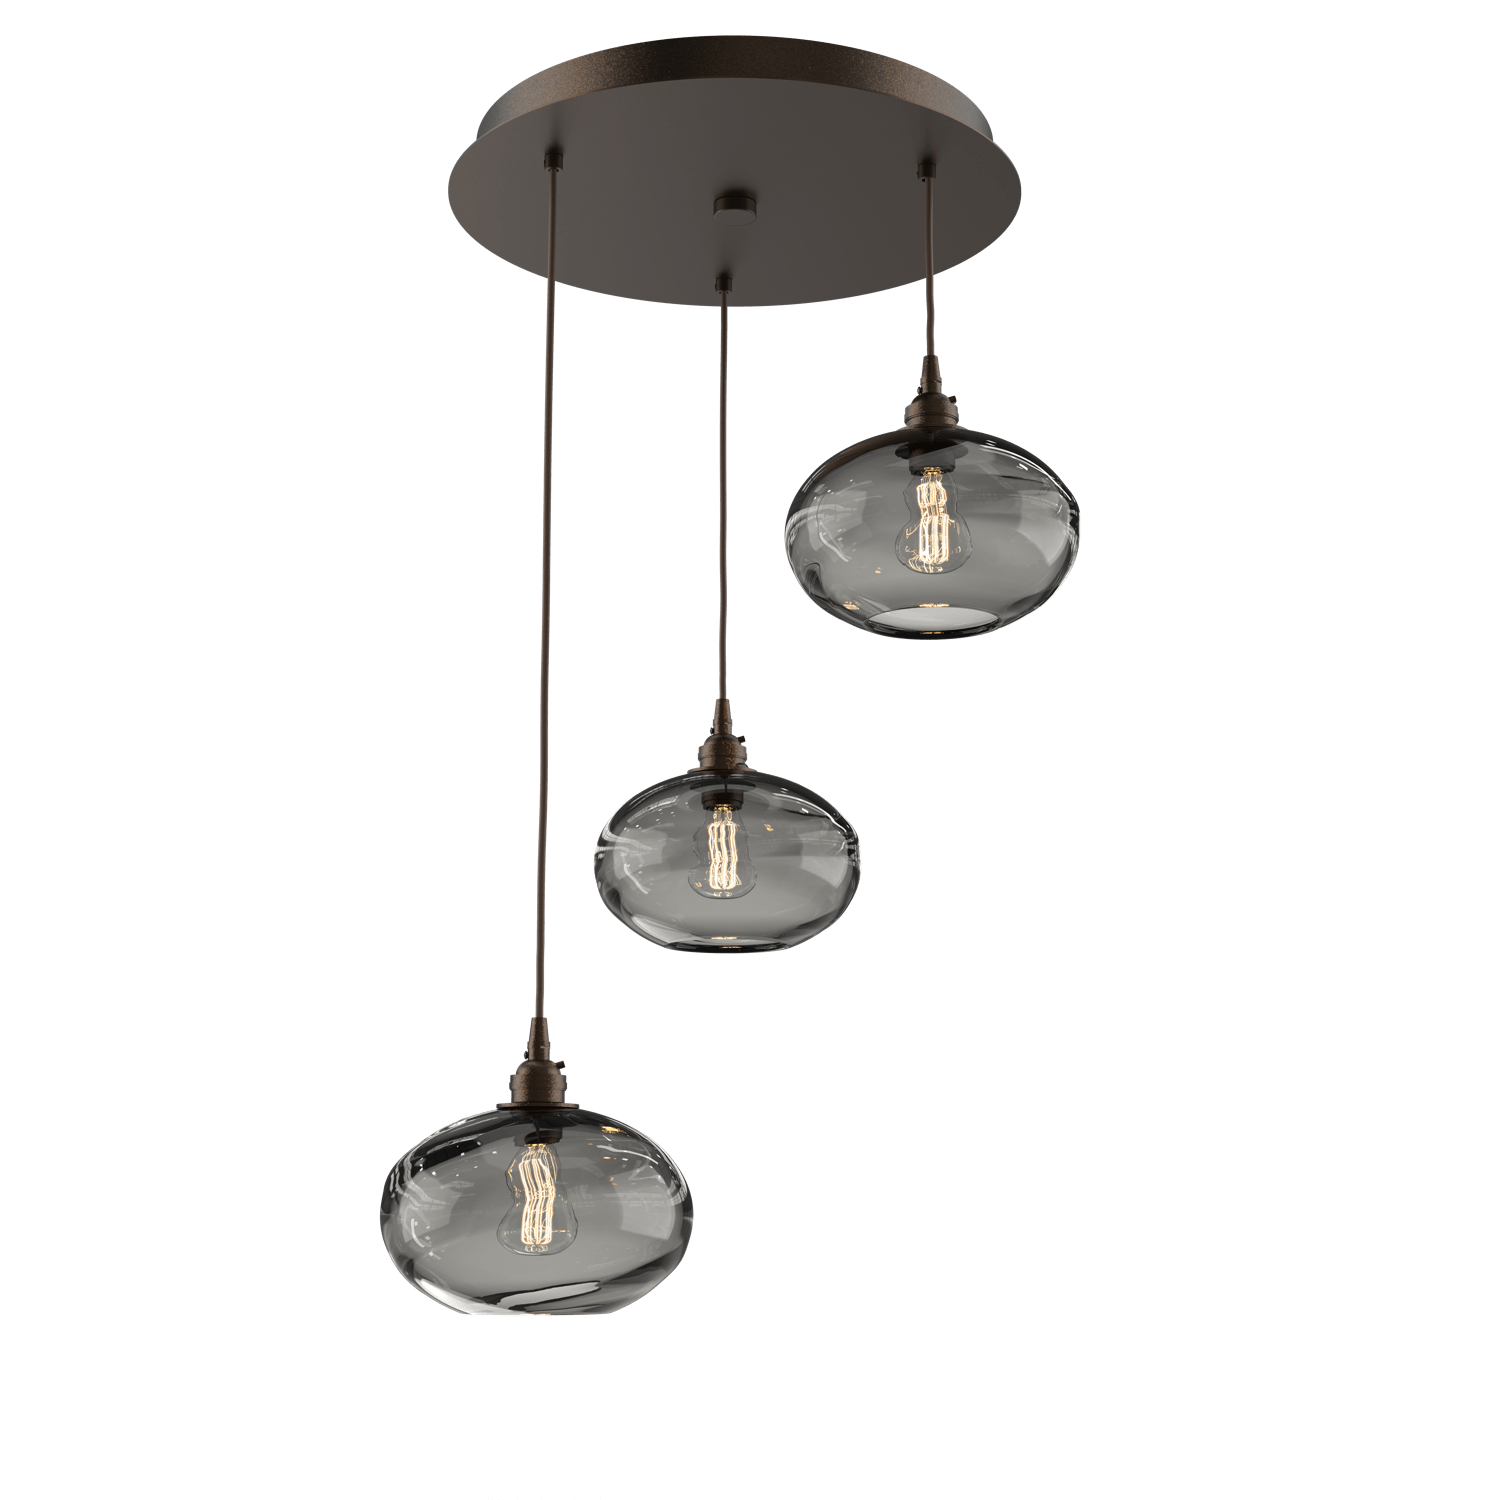 CHB0036-03-FB-OS-Hammerton-Studio-Optic-Blown-Glass-Coppa-3-light-round-pendant-chandelier-with-flat-bronze-finish-and-optic-smoke-blown-glass-shades-and-incandescent-lamping